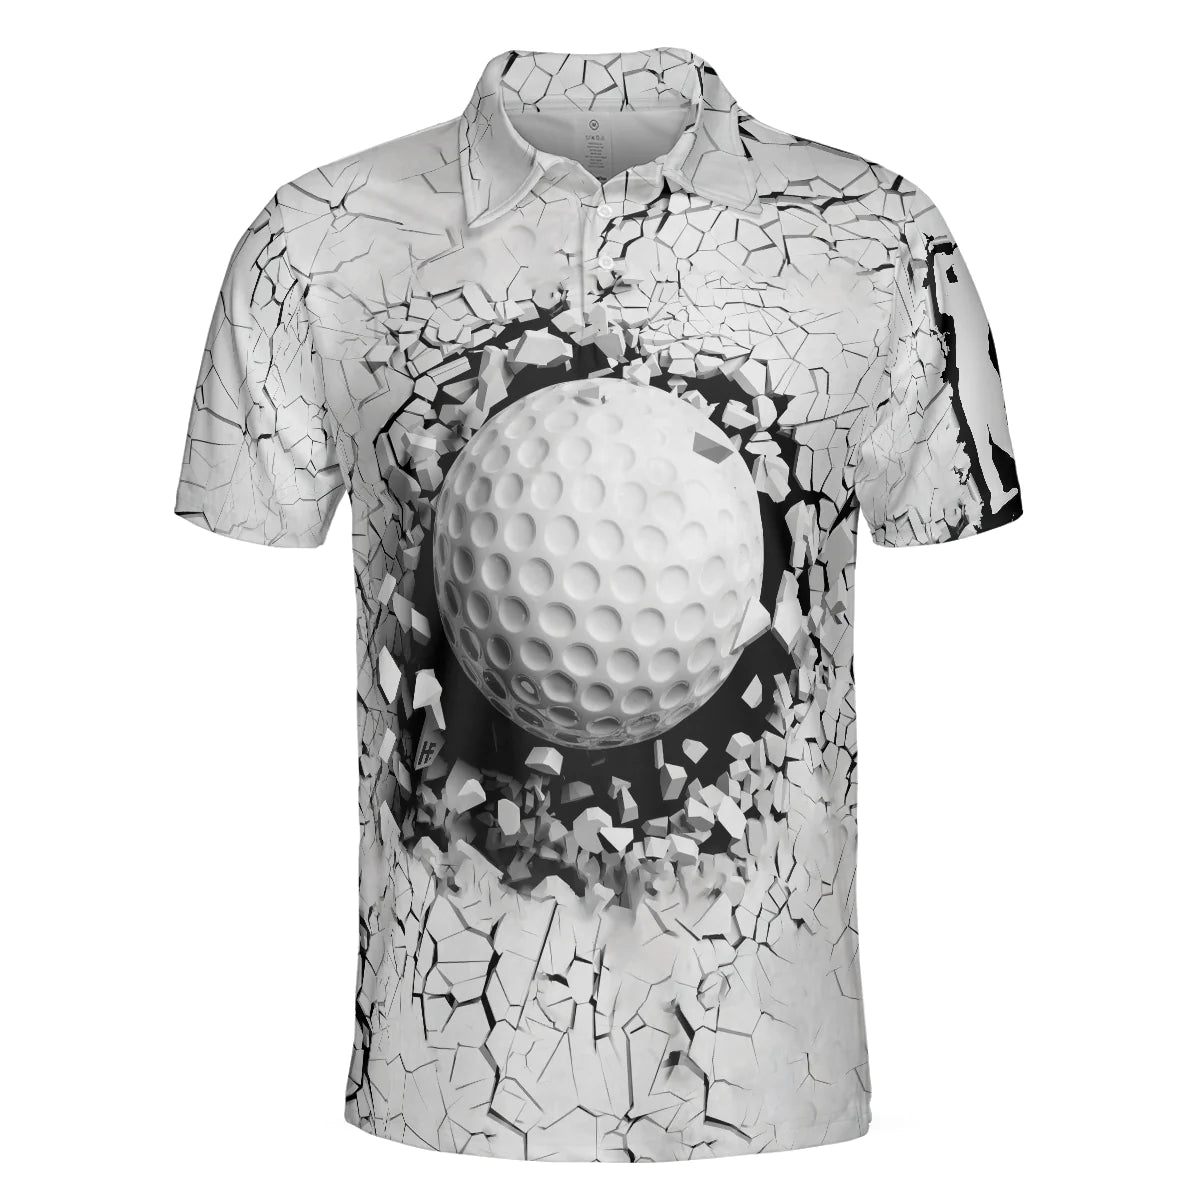 the best golf gift for men an elegant and unique golf breaker polo shirt for golfers gp370 8turs